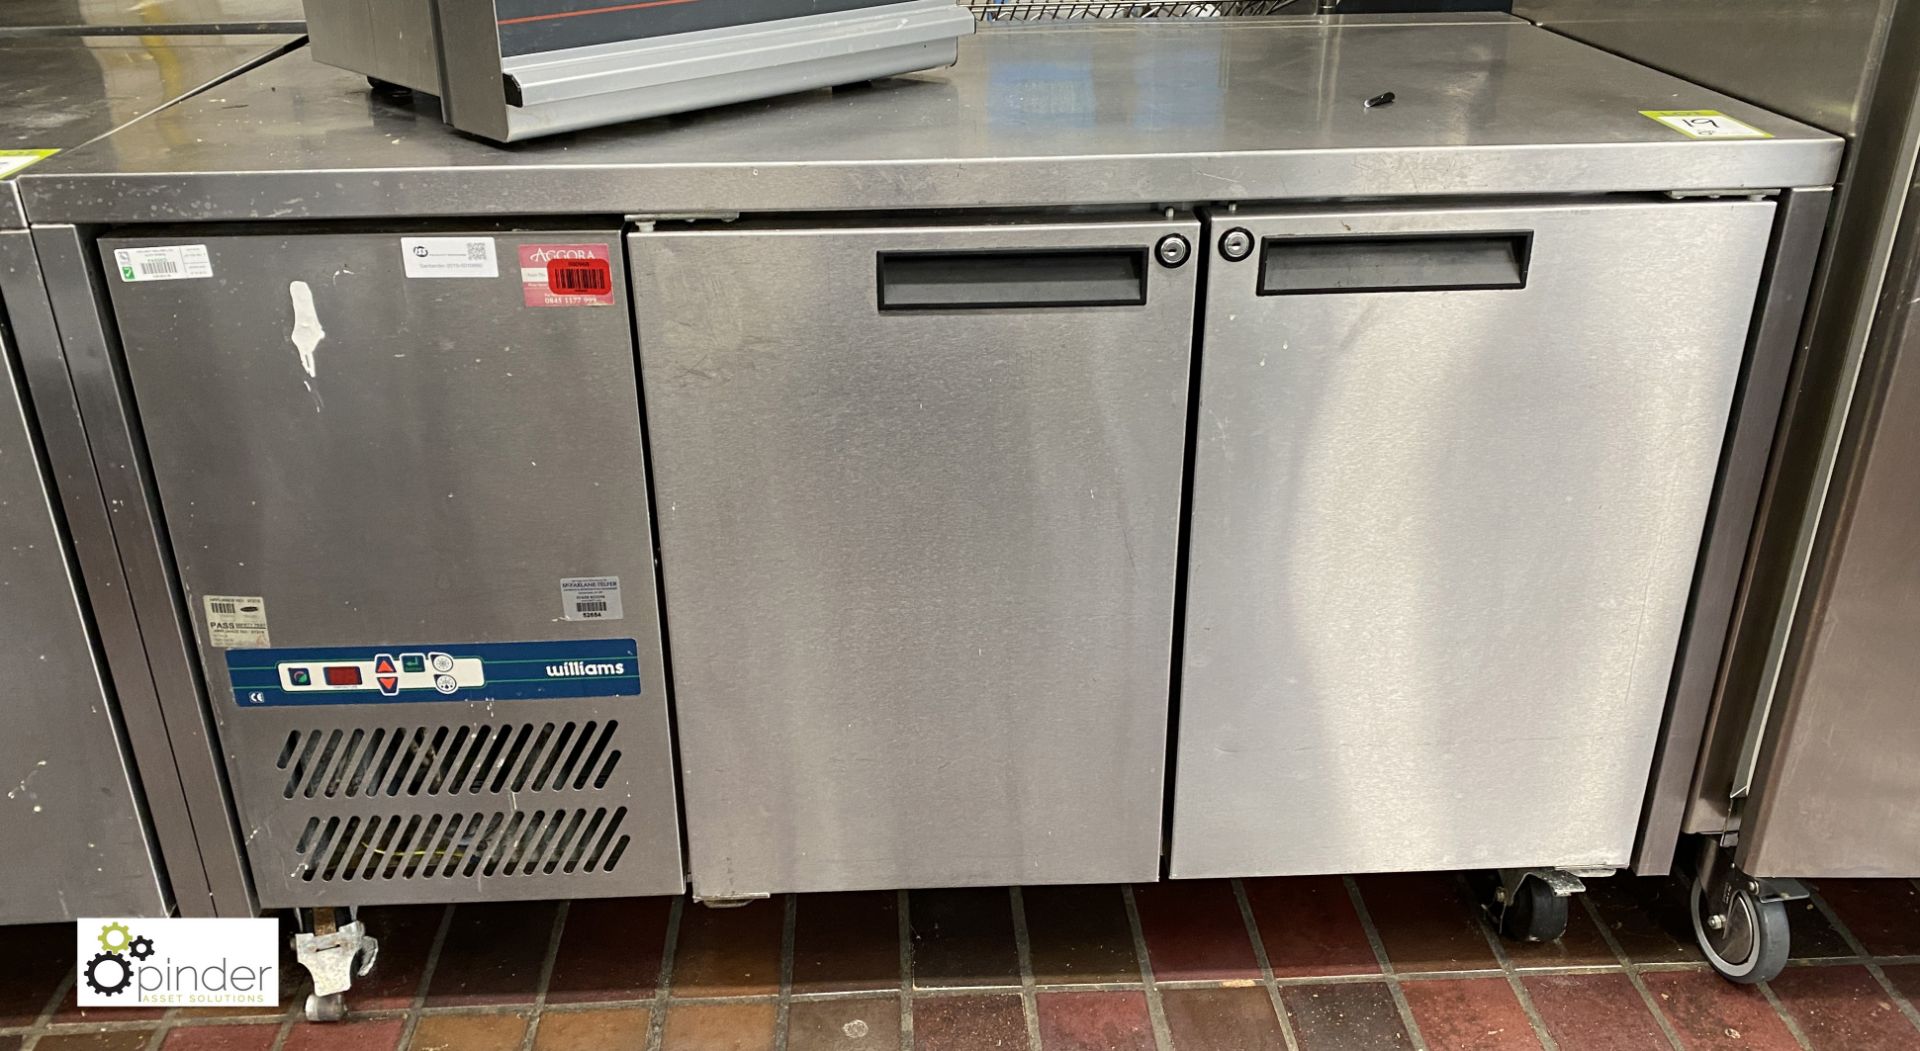 Williams stainless steel mobile double door Chilled Counter, 240volts, 1420mm x 750mm x 860mm, - Image 2 of 4